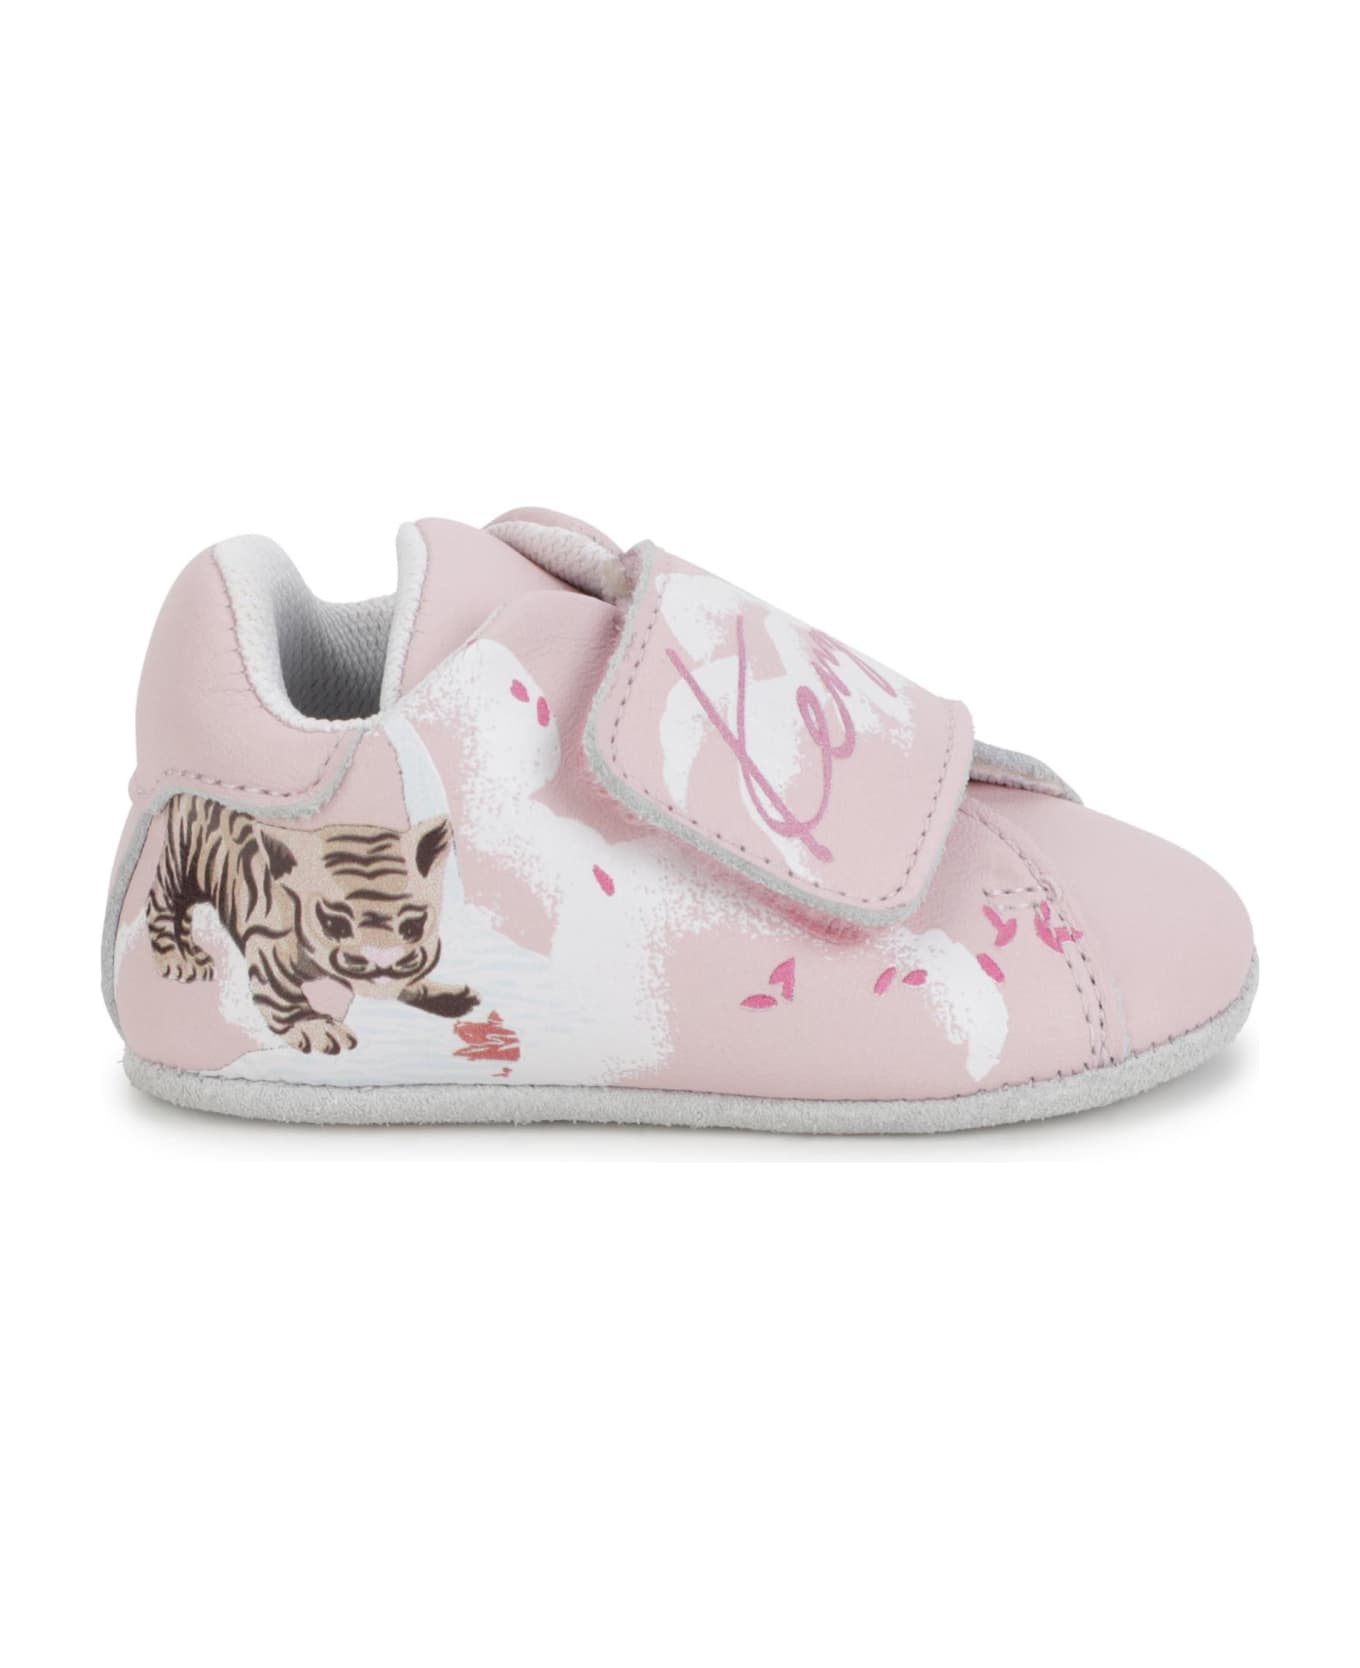 Kenzo Kids First Steps Shoes With Print - Pink